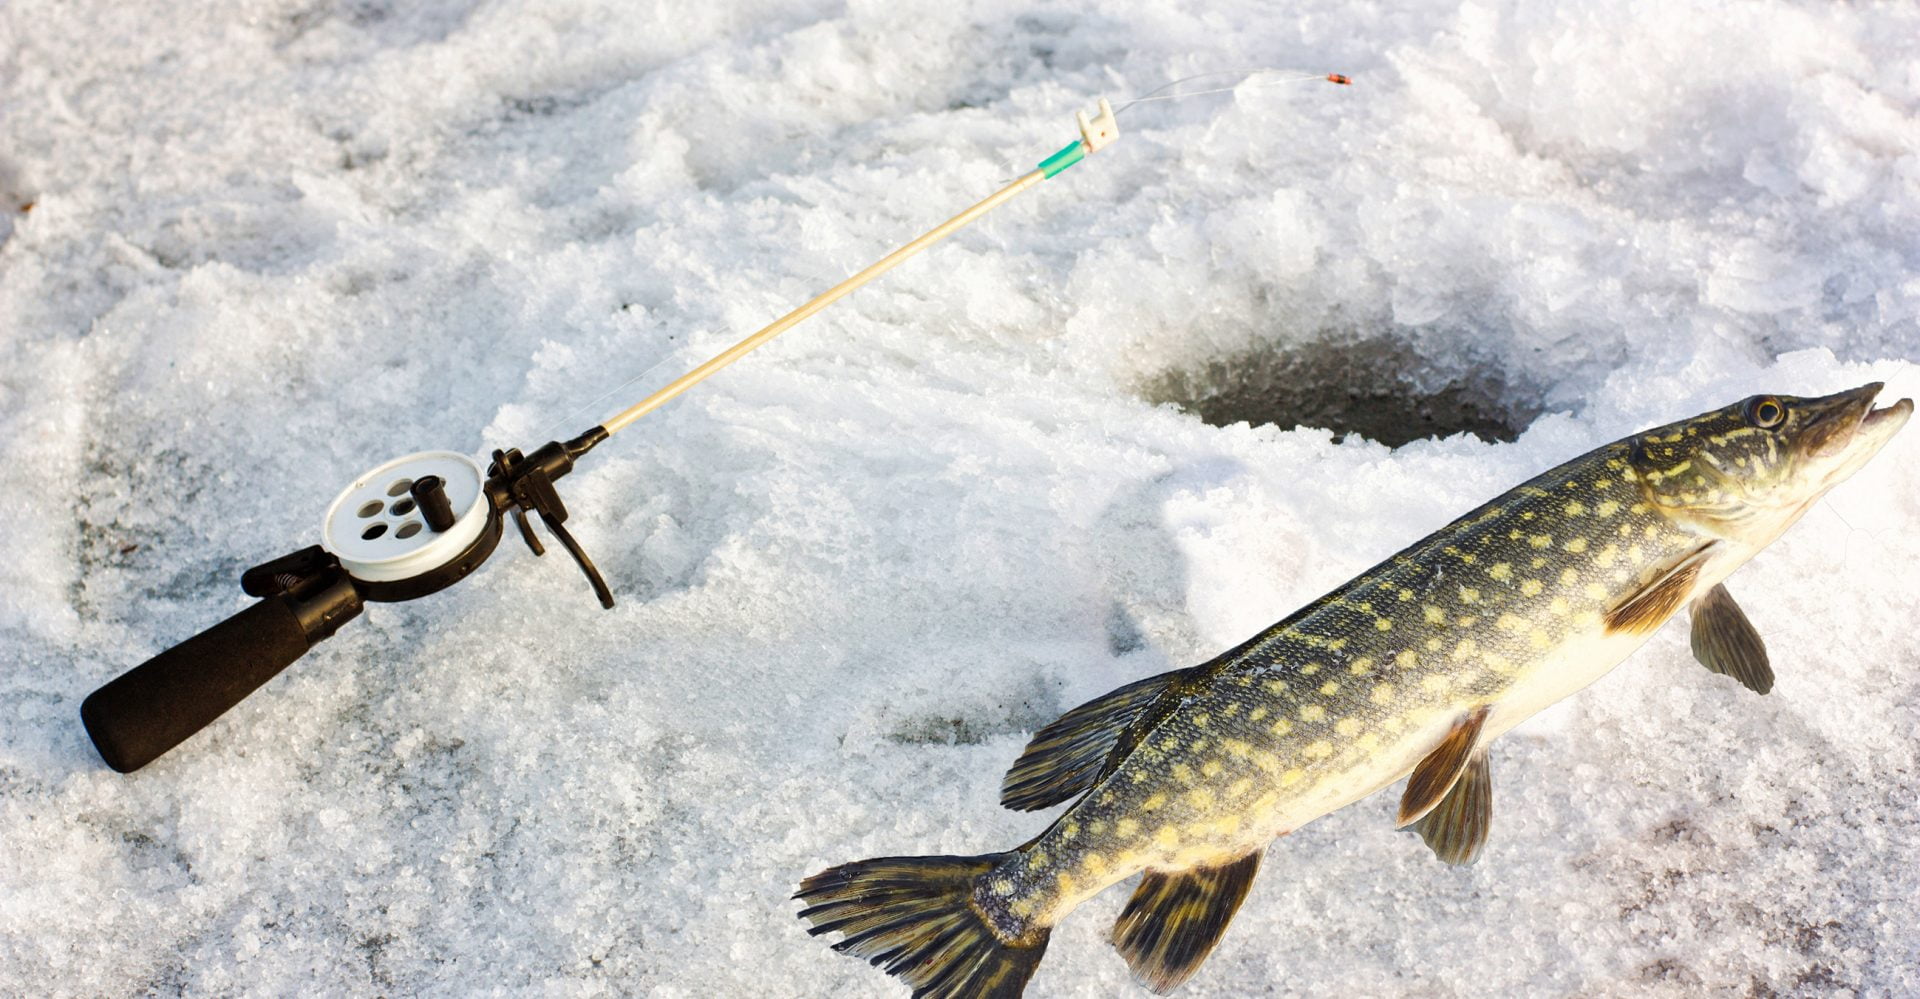 https://lotwicefishing.com/wp-content/uploads/caught-pike-fish-and-fishing-gear-on-ice-scaled-aspect-ratio-1920-999.jpg